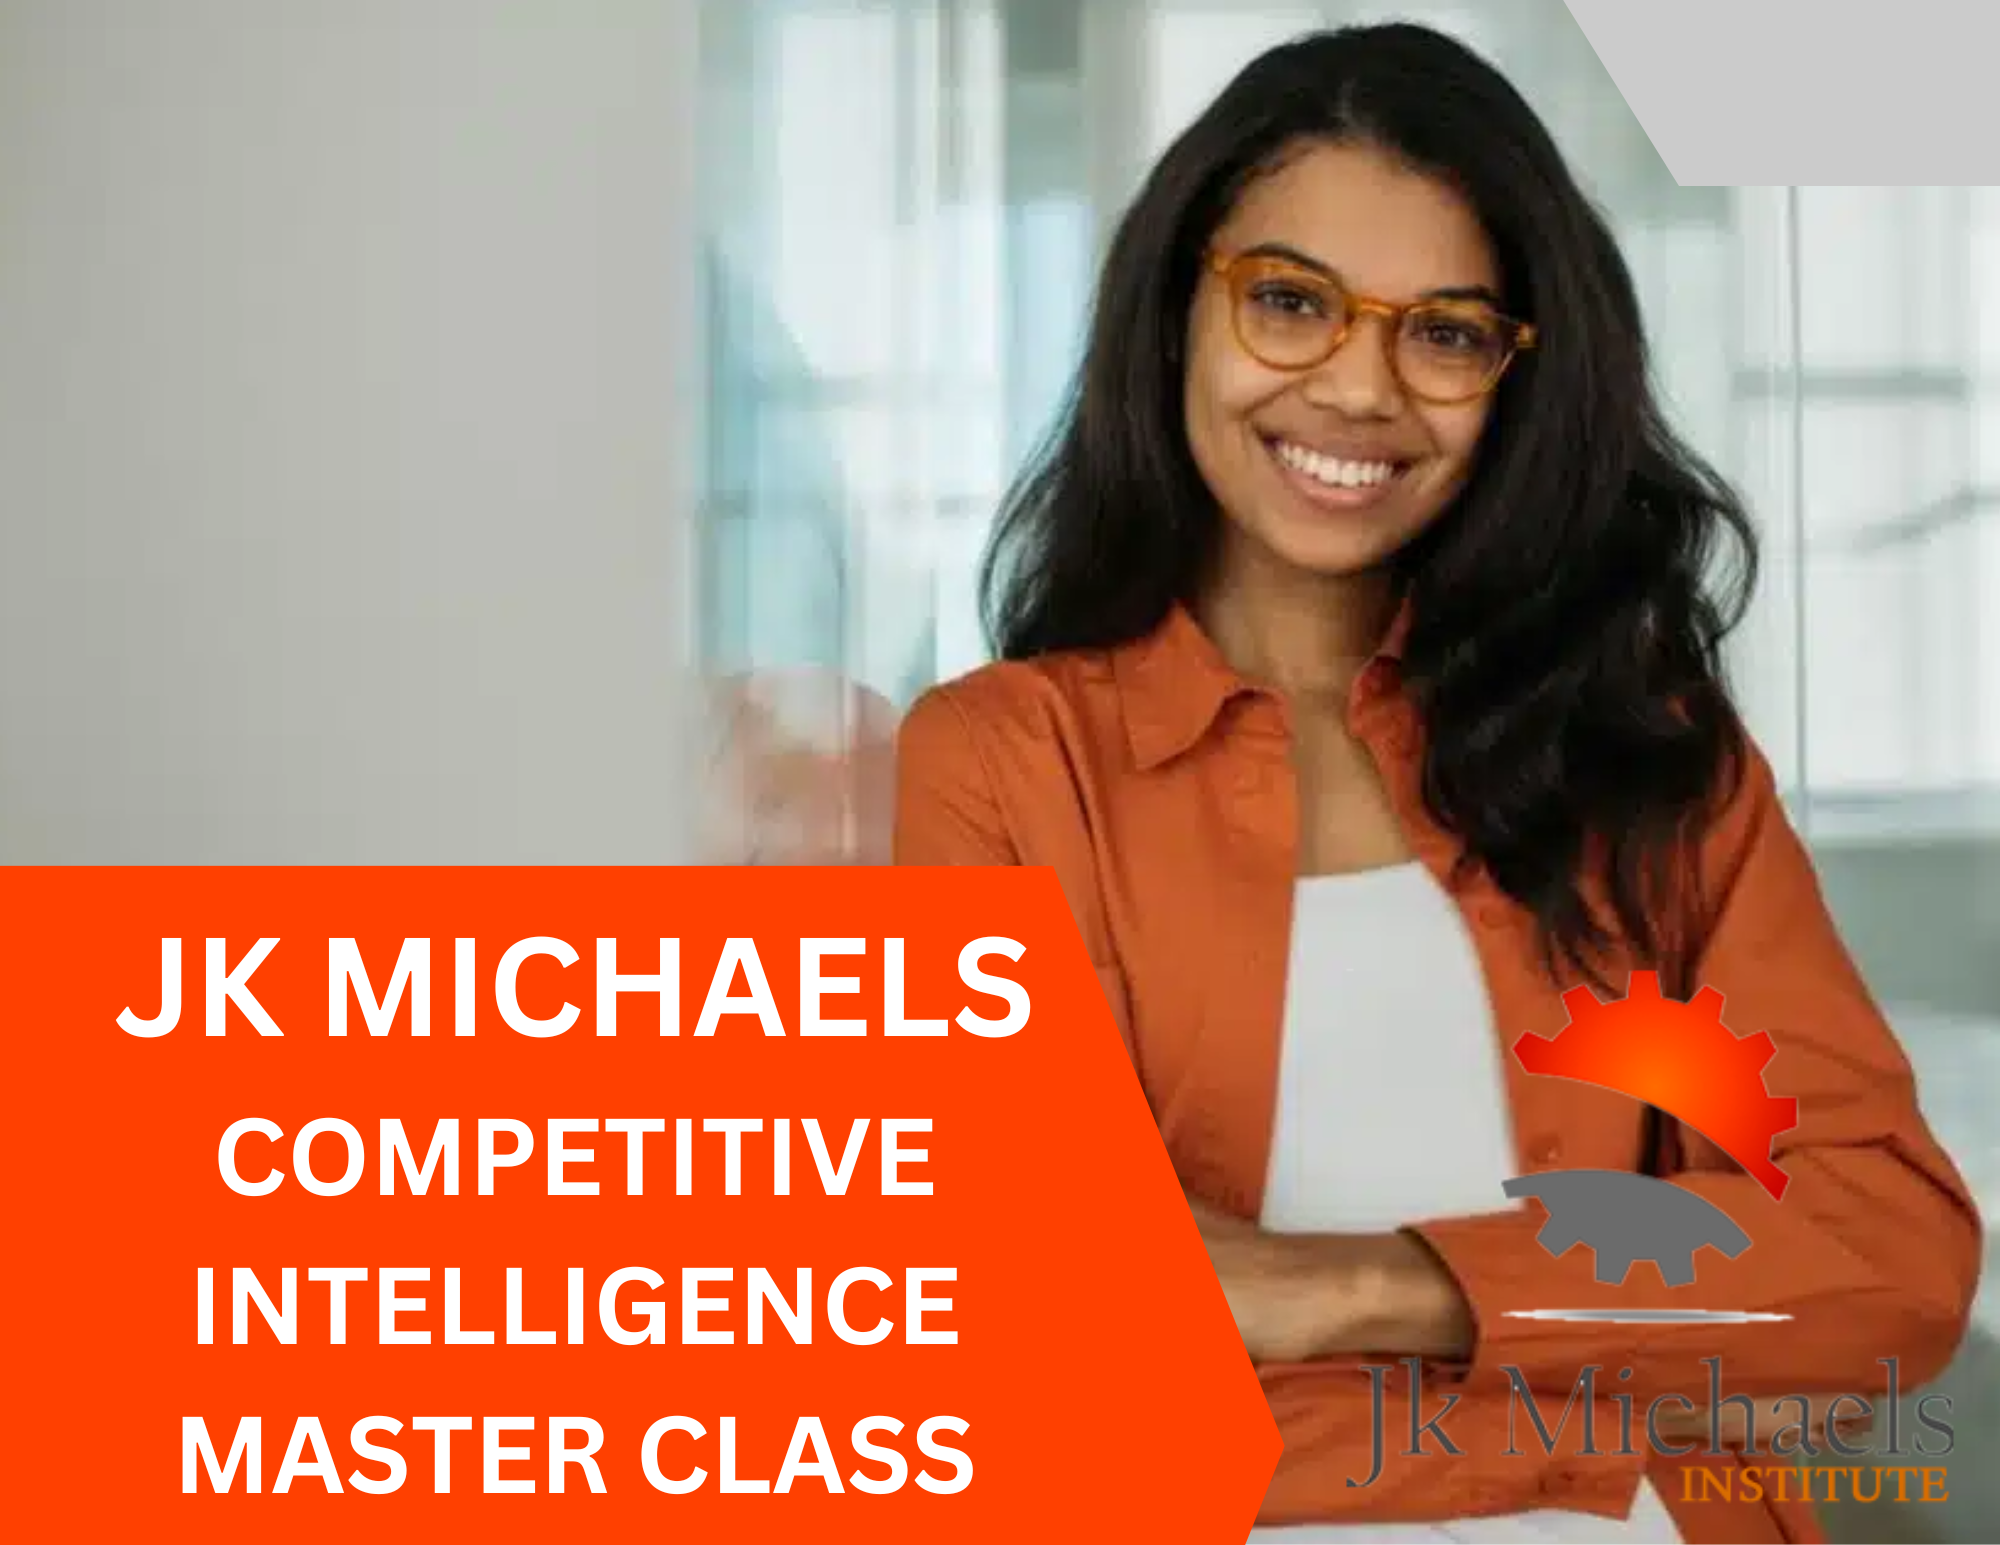 COMPETITIVE INTELLIGENCE MASTER CLASS